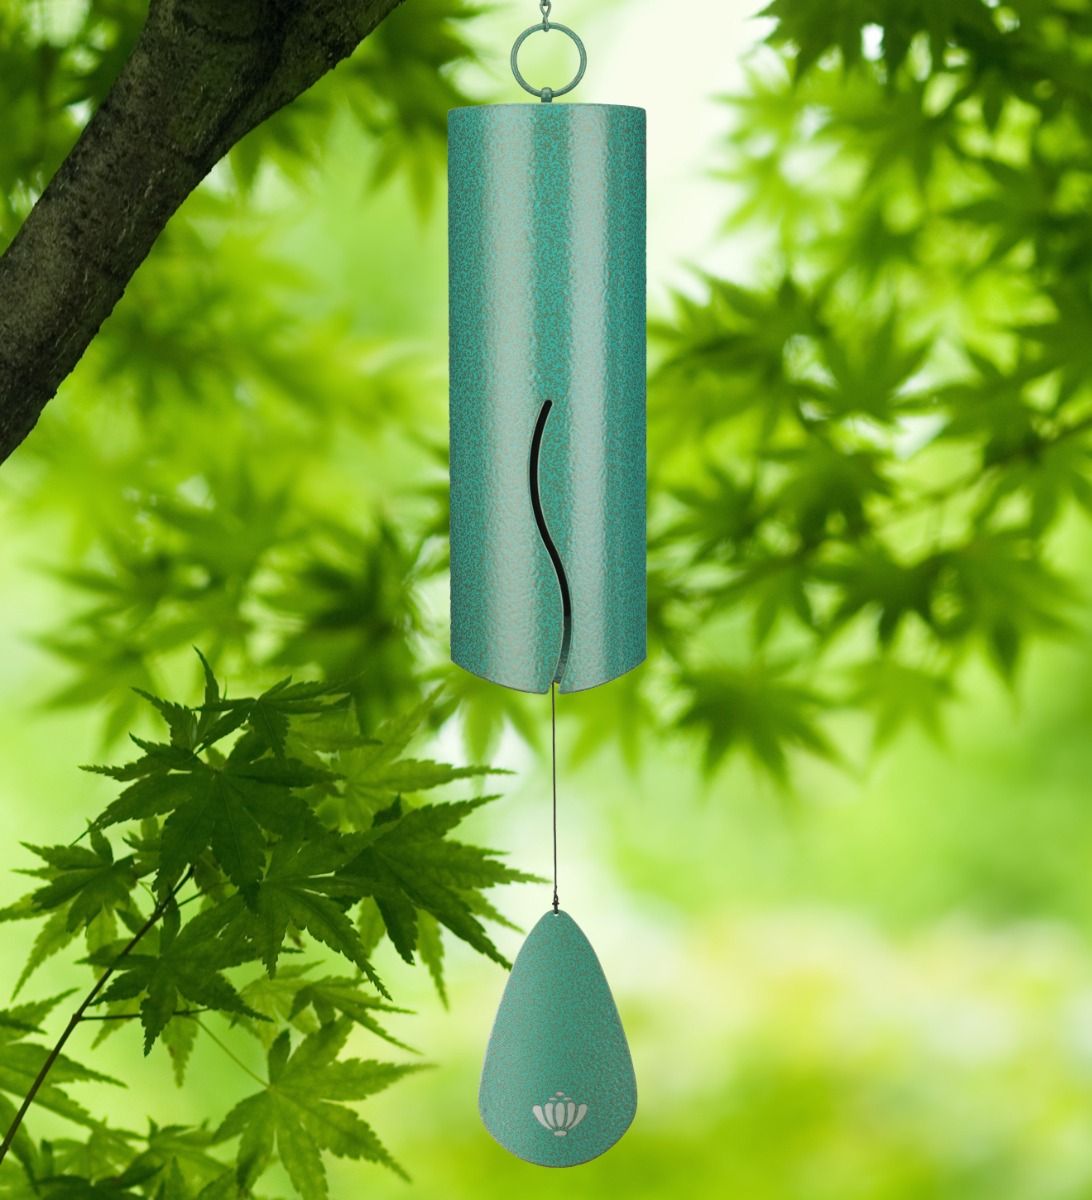 Regal Bell 6"Diameter Wind Chime Collection